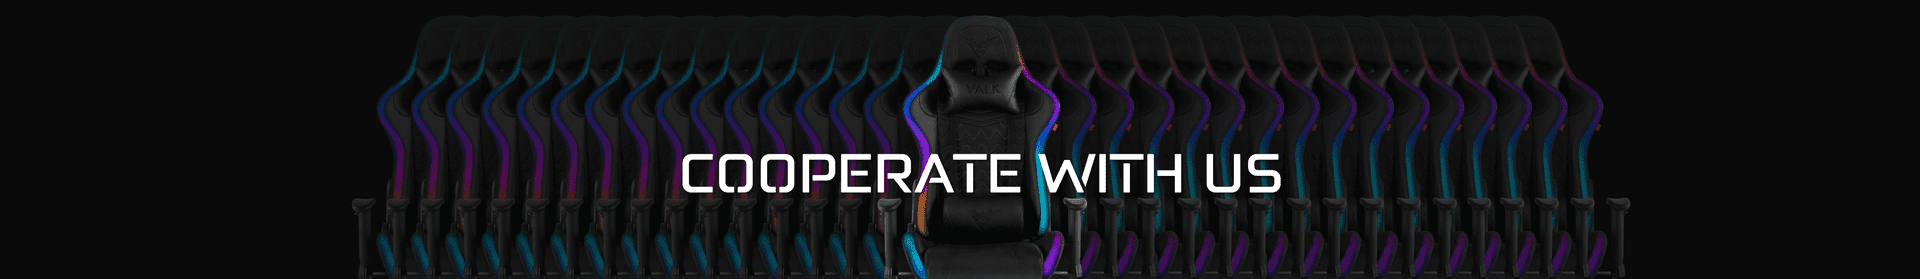 VALK_gaming_chairs_cooperate_with_us